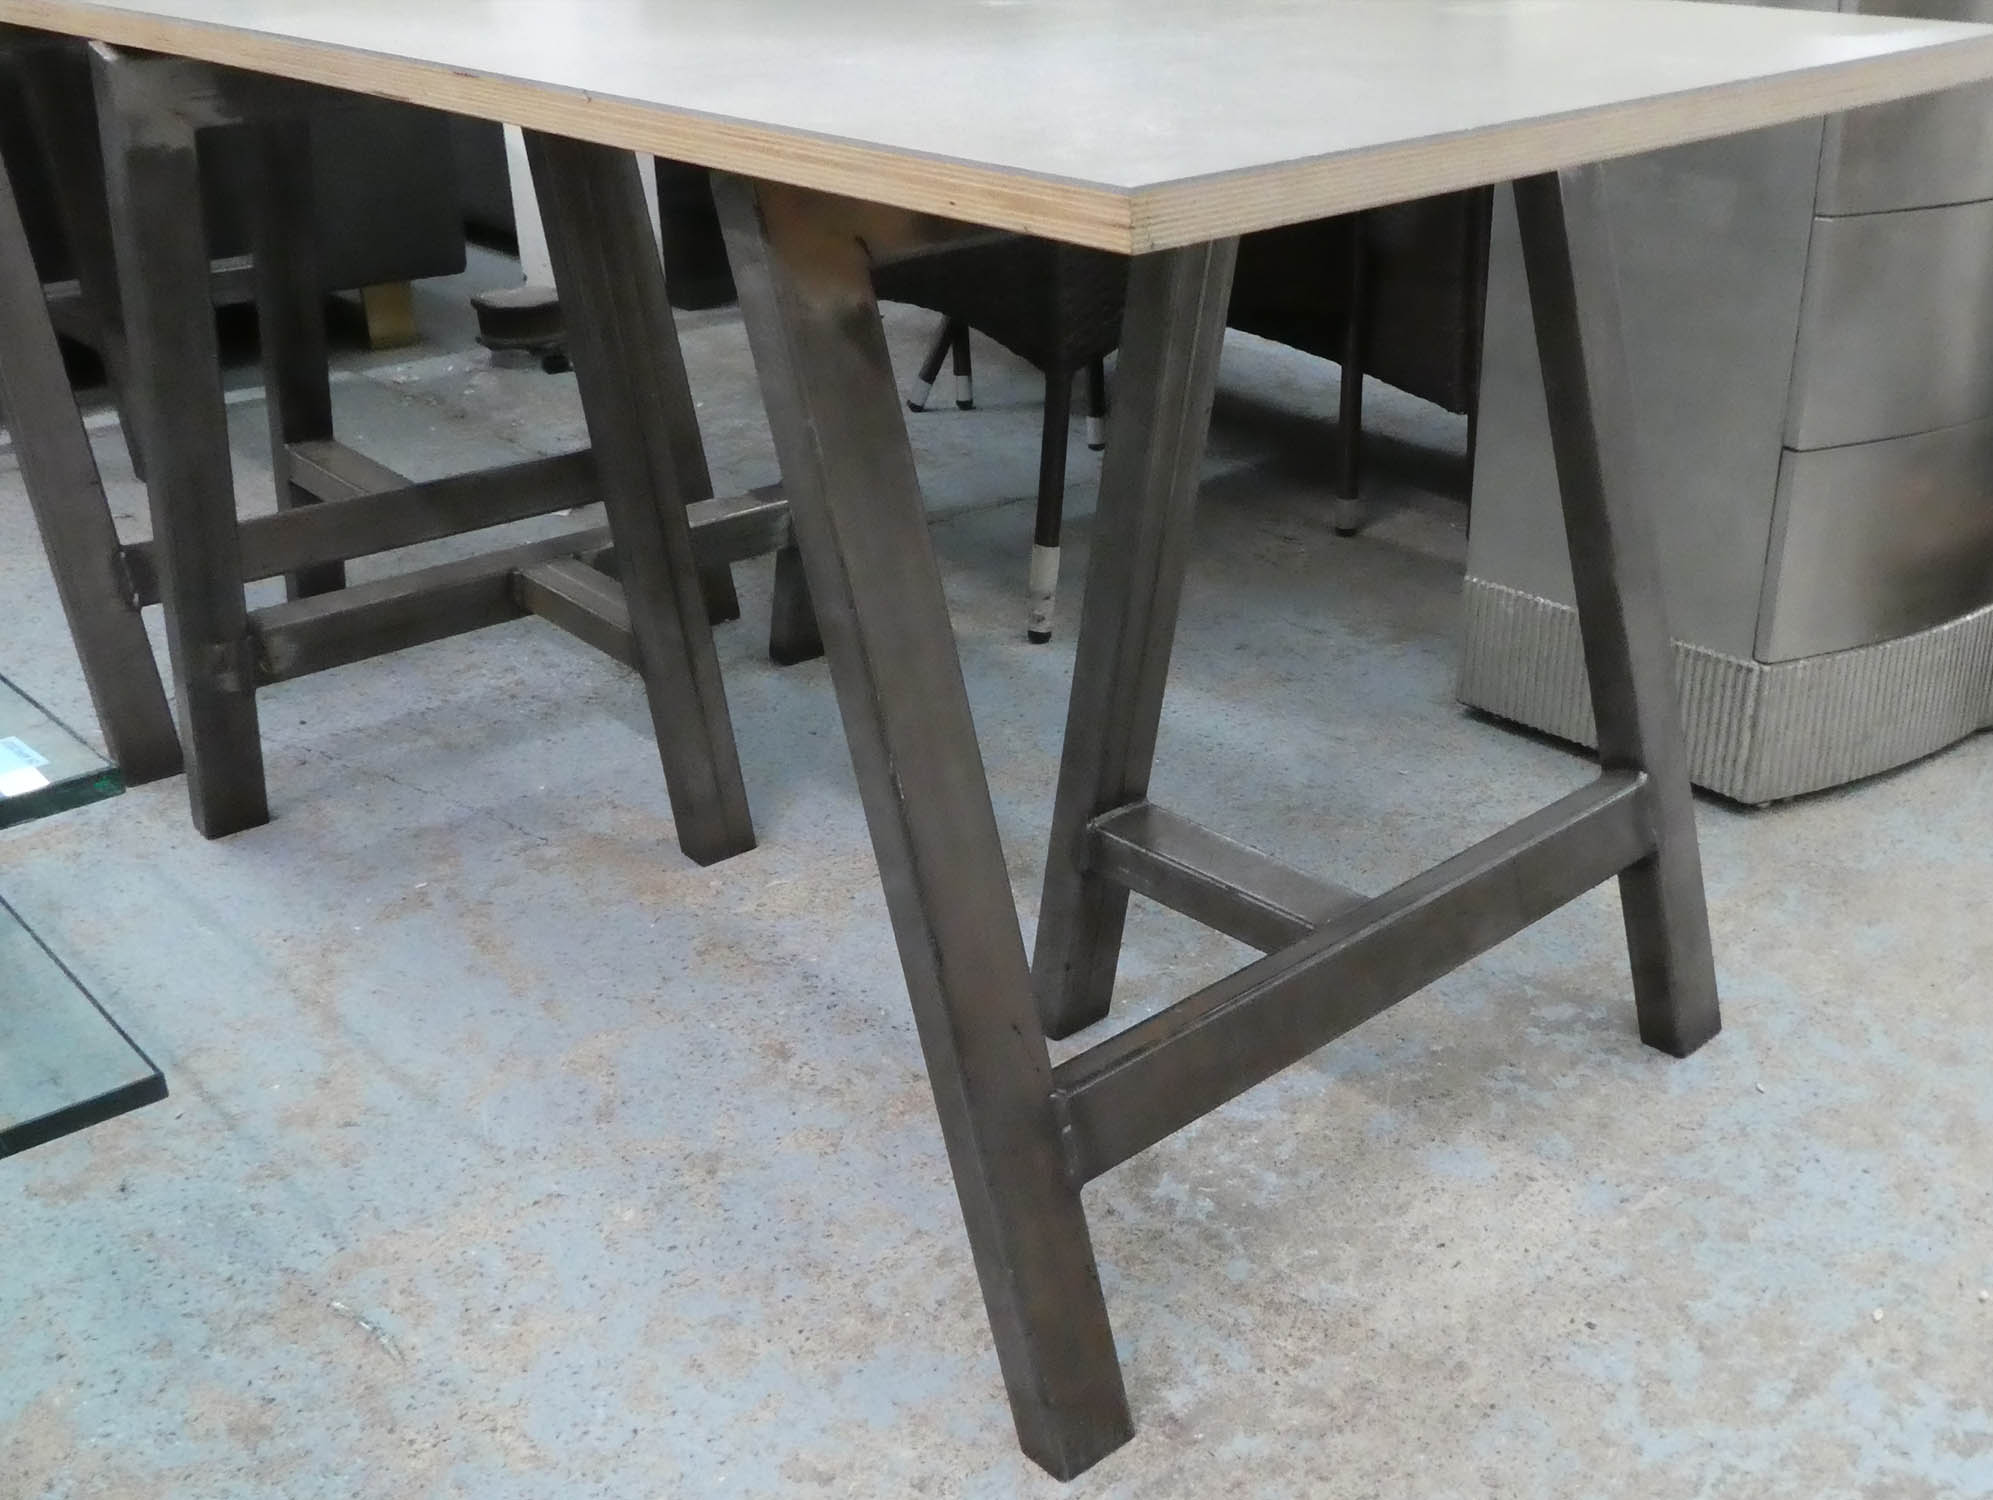 TRESSEL TABLE, contemporary bespoke steel tressels, with plywood top, 137.5cm x 73cm x 75cm. - Image 2 of 5